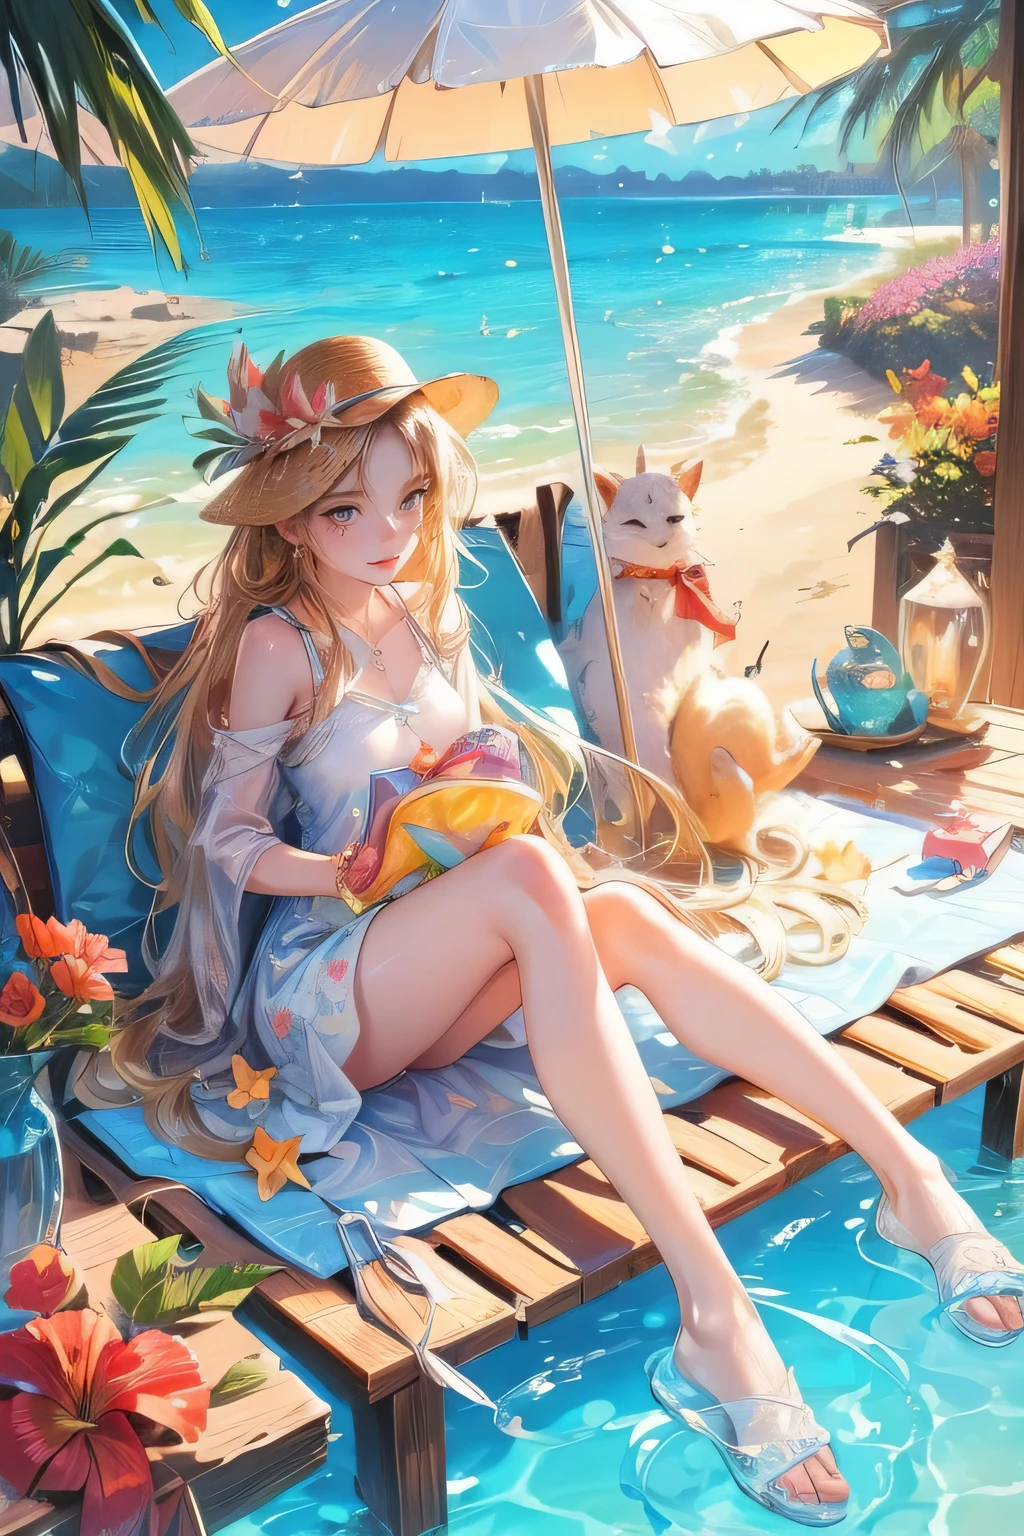 (Highest quality, High resolution, 32k , Super detailed:1.3, masterpiece:1.2, Realistic:1.37), Enjoying a beach vacation, pretty girl, Pastel sunglasses on head, Crystal White Skin, Wearing a colorful and cute swimsuit with ribbons, Golden sandy beaches, Clear turquoise water, Gentle sea waves, Shining Sun, cool ocean breeze, Palm trees swaying, Playful seagulls, Expression of joy, Long flowing hair, smile, Rosy Cheeks, Sparkling eyes, Sand toe, Beach towel, Sunscreen lotion, Straw hat, vibrant and lively atmosphere, Summer atmosphere, Happy and carefree, Carefree laughter, relaxing getaway, Colorful beach umbrellas, Refreshing tropical drinks, Beach Toys, Beach ball, shell, Sand castles, footprints in the sand, Family and friends having fun, Vibrant beach scene, Perfect summer moments, pure joy and happiness, The magic of childhood, eternal memories